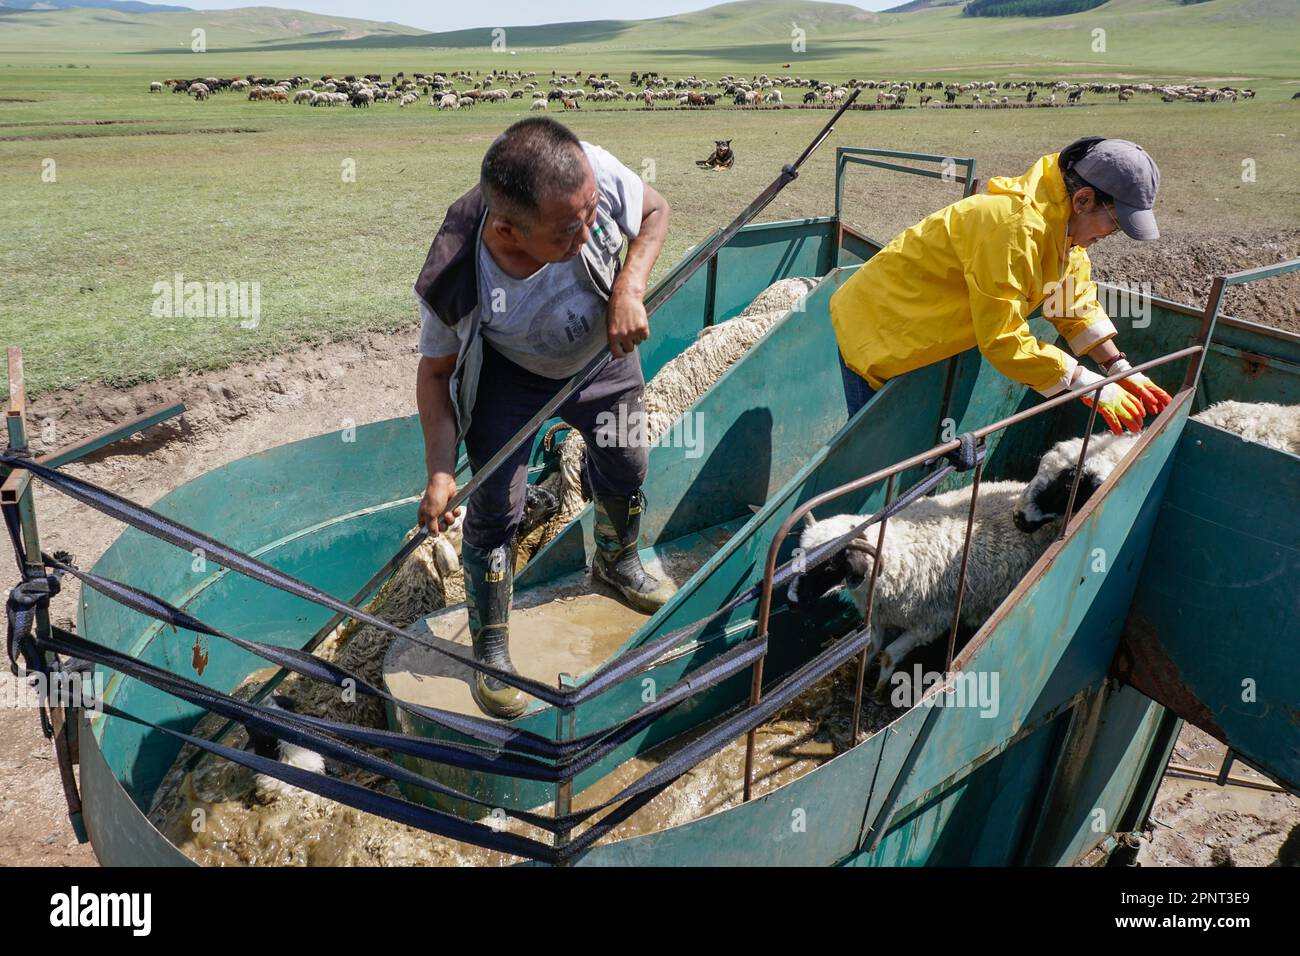 Baatarjav Riimed and Tserendulam Chuluunkhuu wash sheep and goats in a cattle tub in Erdenet, Orkhon province, Mongolia on August 5, 2021. Small livestock are washed and disinfected once a year to prevent parasitic diseases. (Khorloo Khukhnohoi/Global Press Journal) Stock Photo